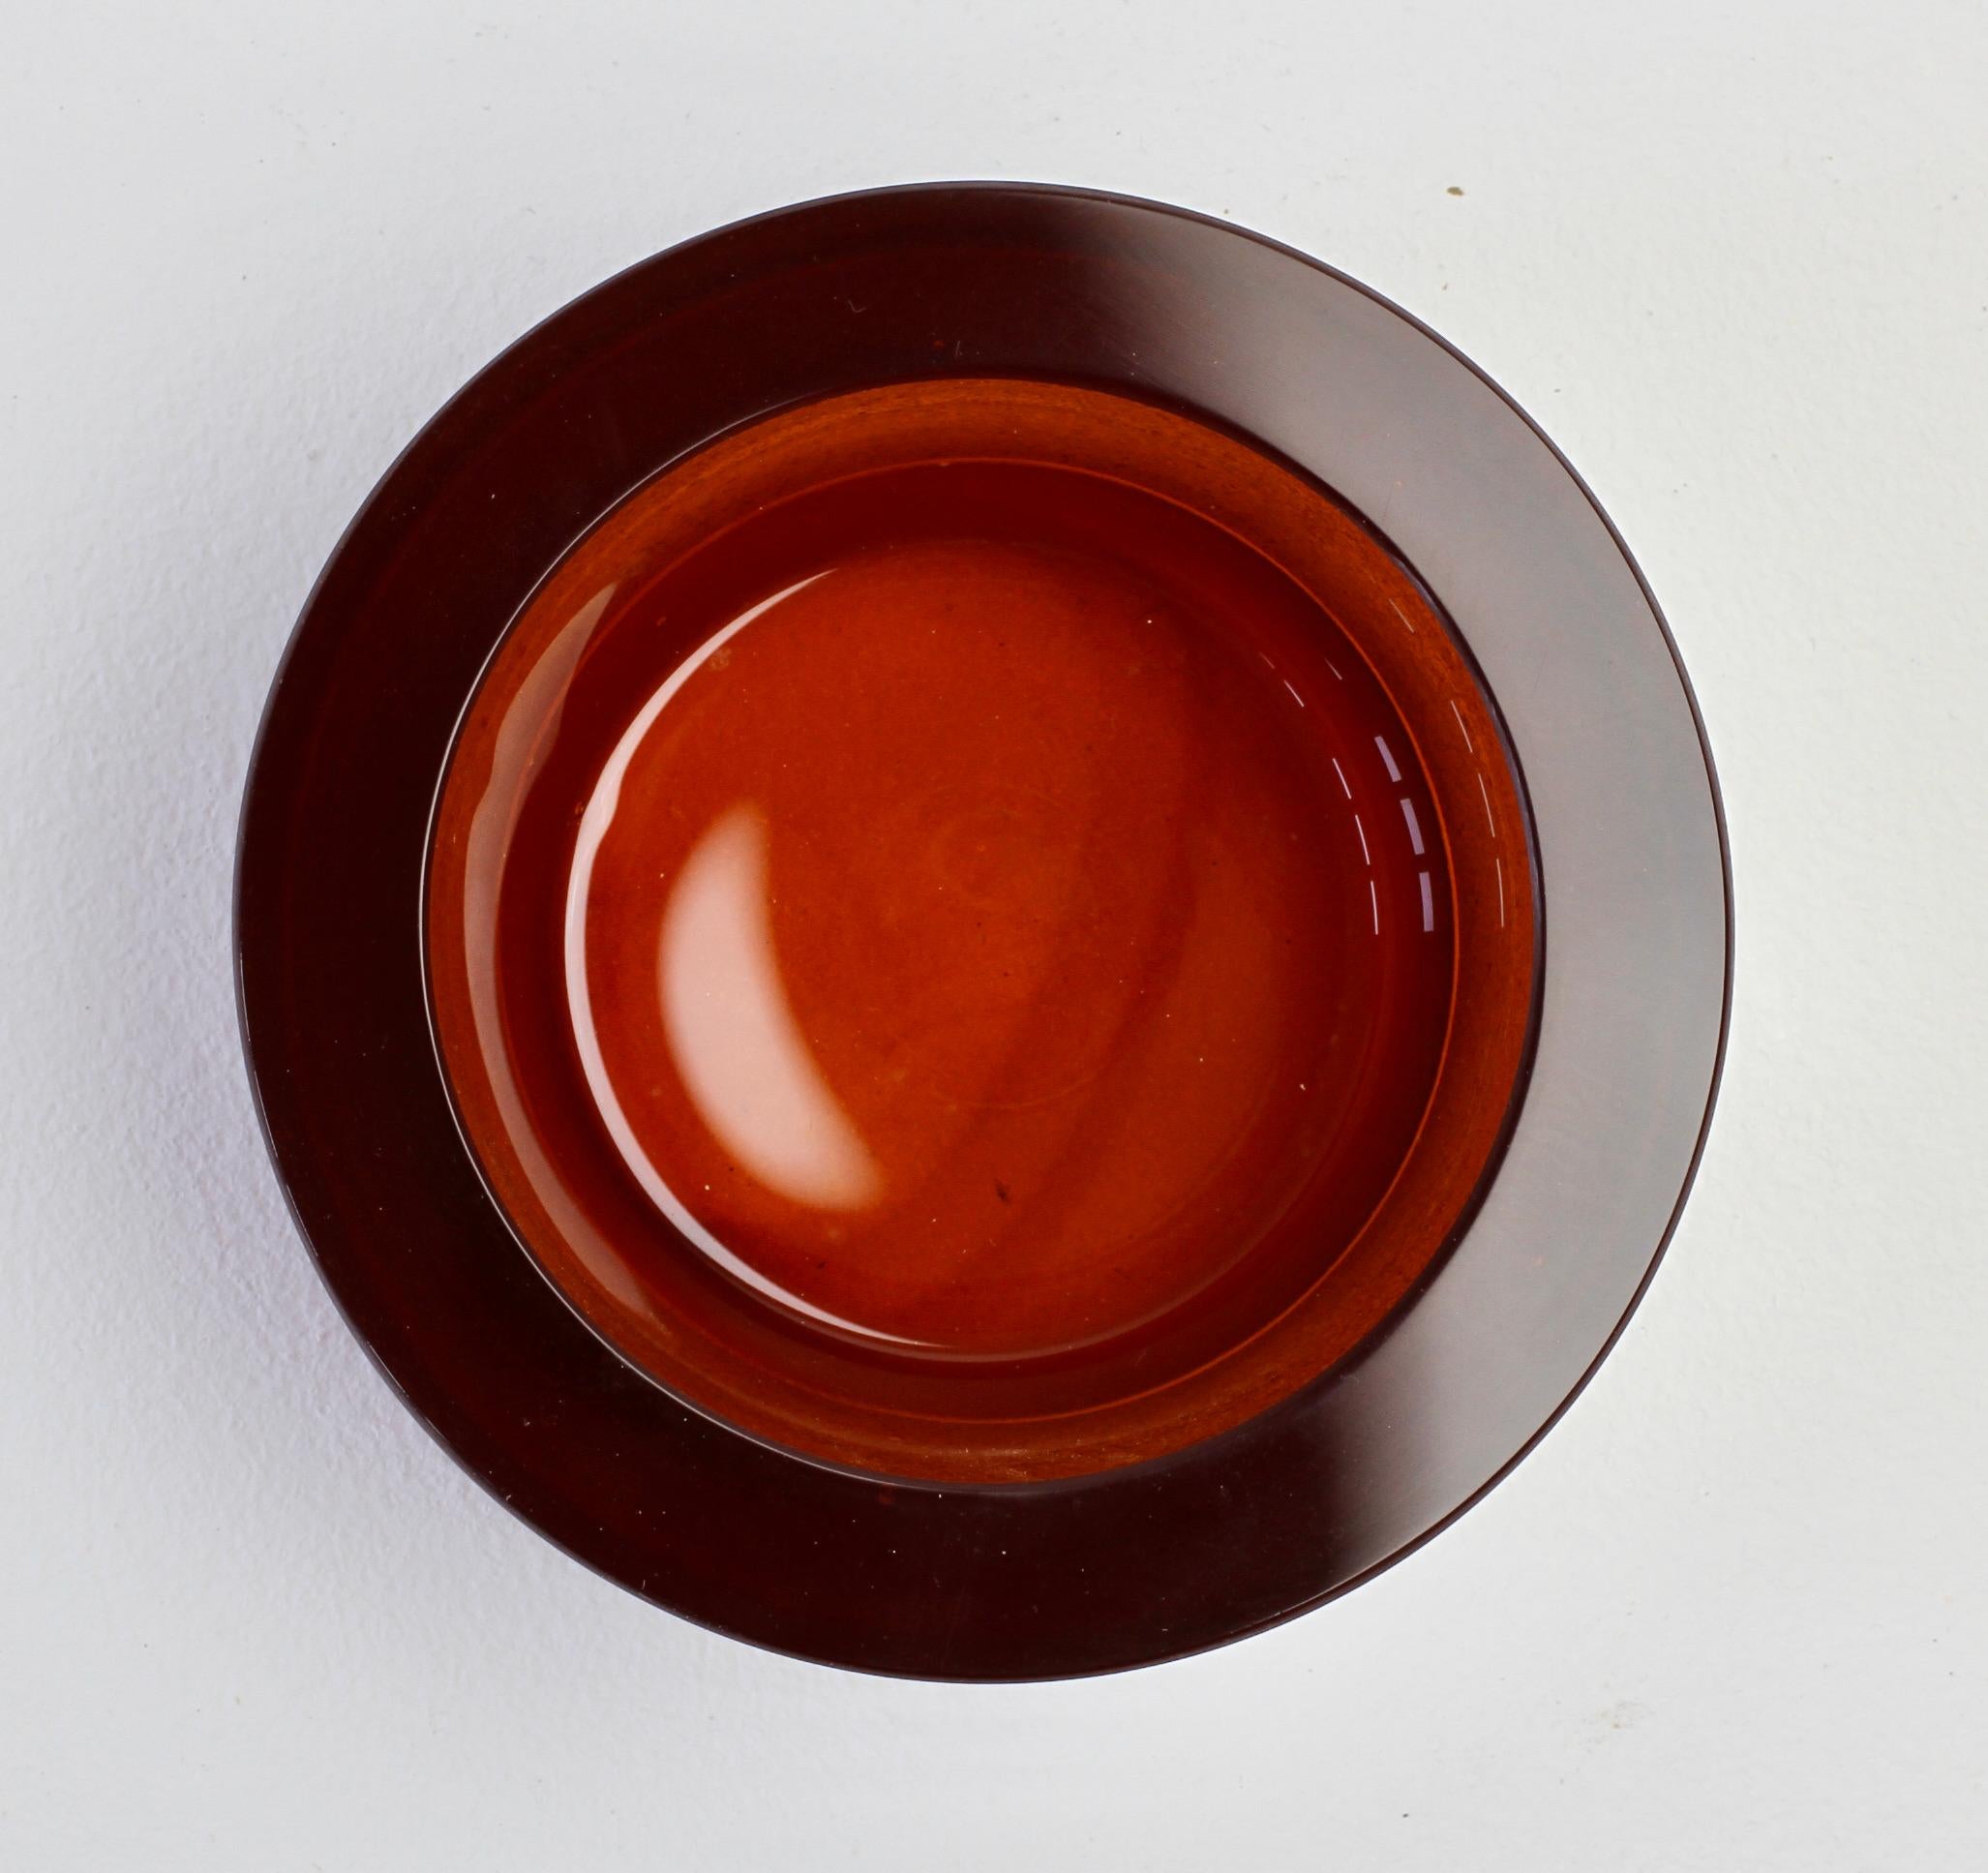 Stunning honey brown amber 'a Scavo' white colored / coloured round circular glass bowl, dish or ashtray by Seguso Vetri d'Arte Murano, Italy, circa 1980s. Elegant in form - rather minimalist but with the obvious sign of quality with the thick and